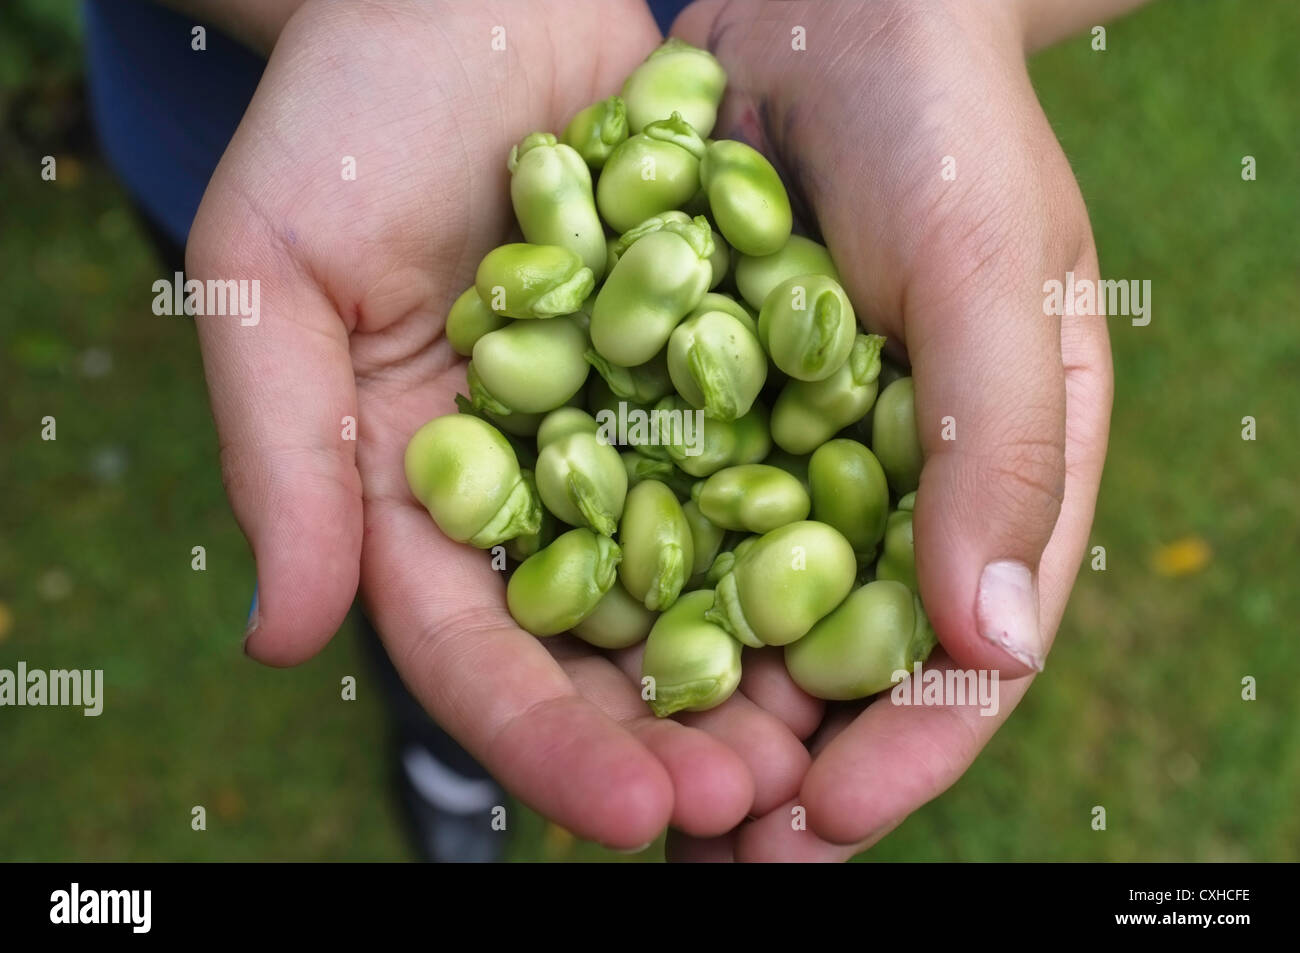 A child holding podded broad beans picked from the garden Stock Photo